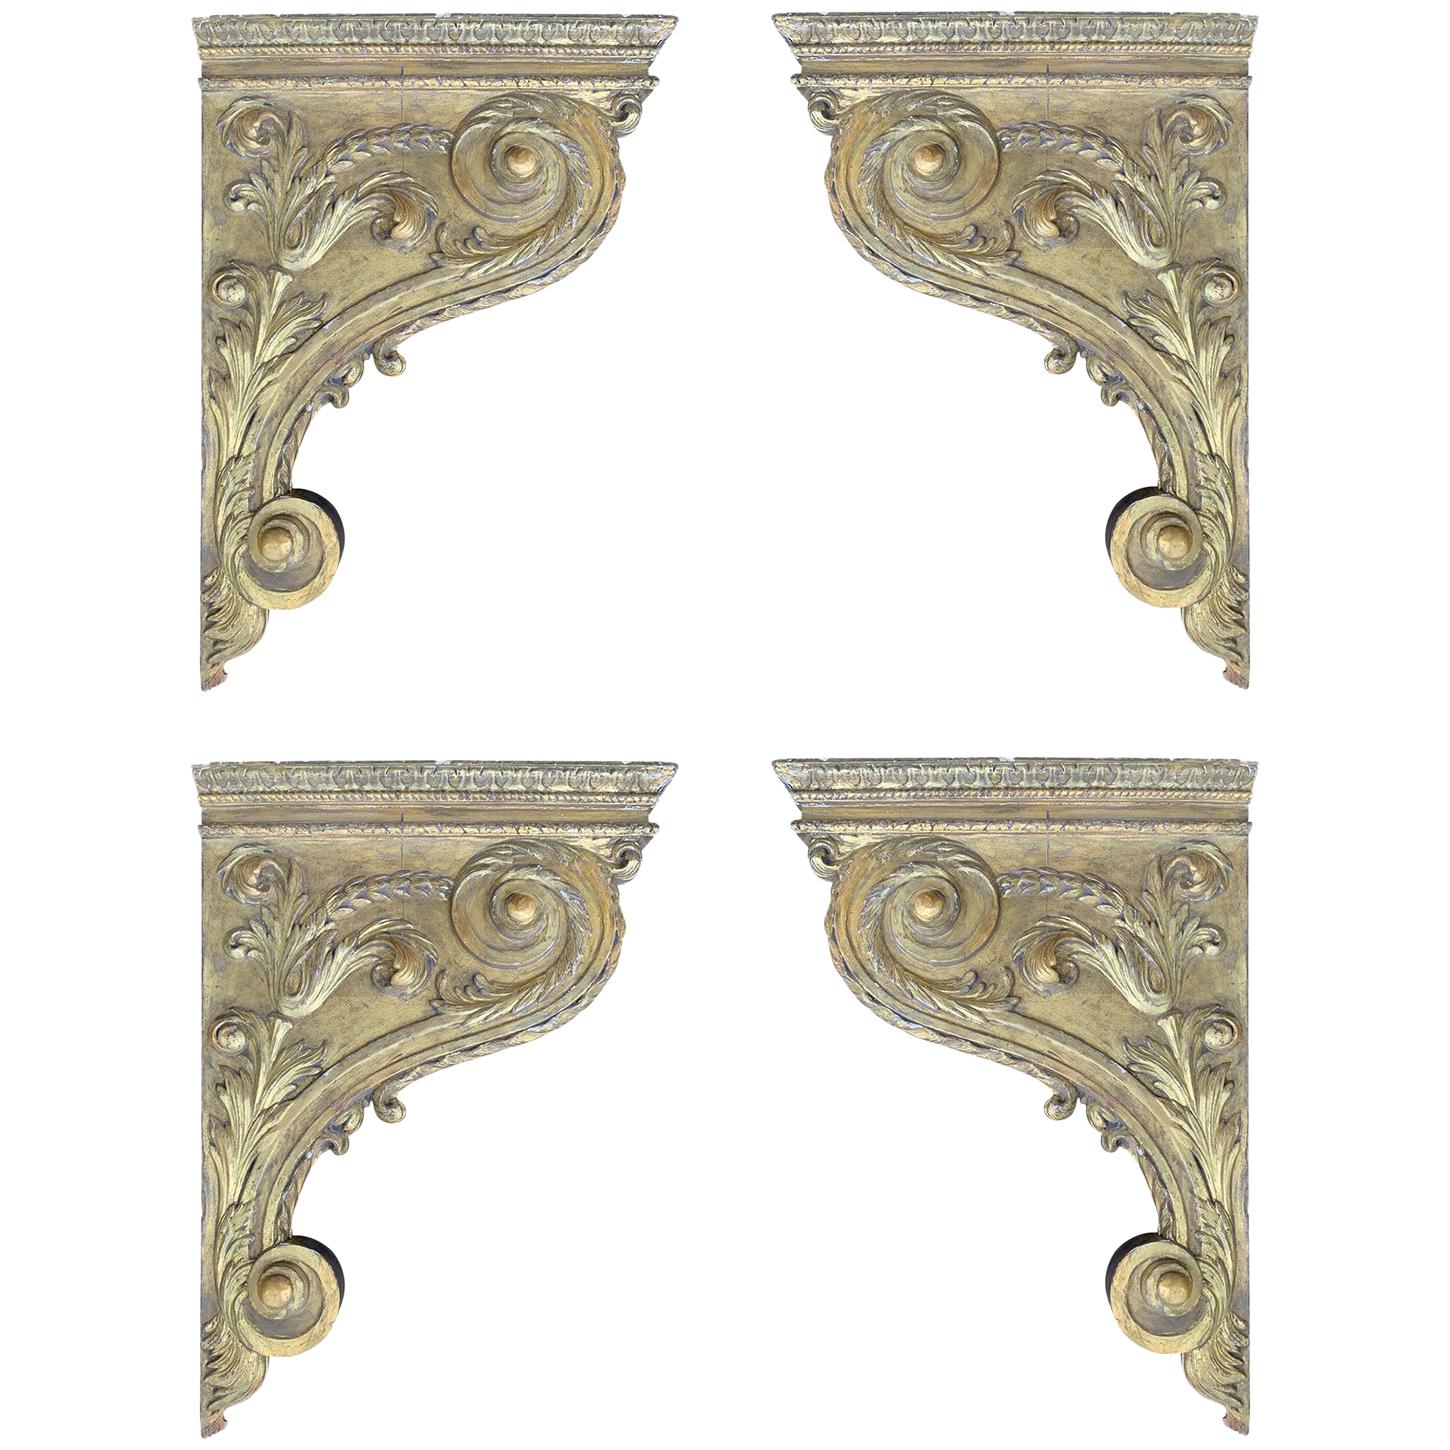 Set of Four 18th Century French Giltwood Corbels / Brackets